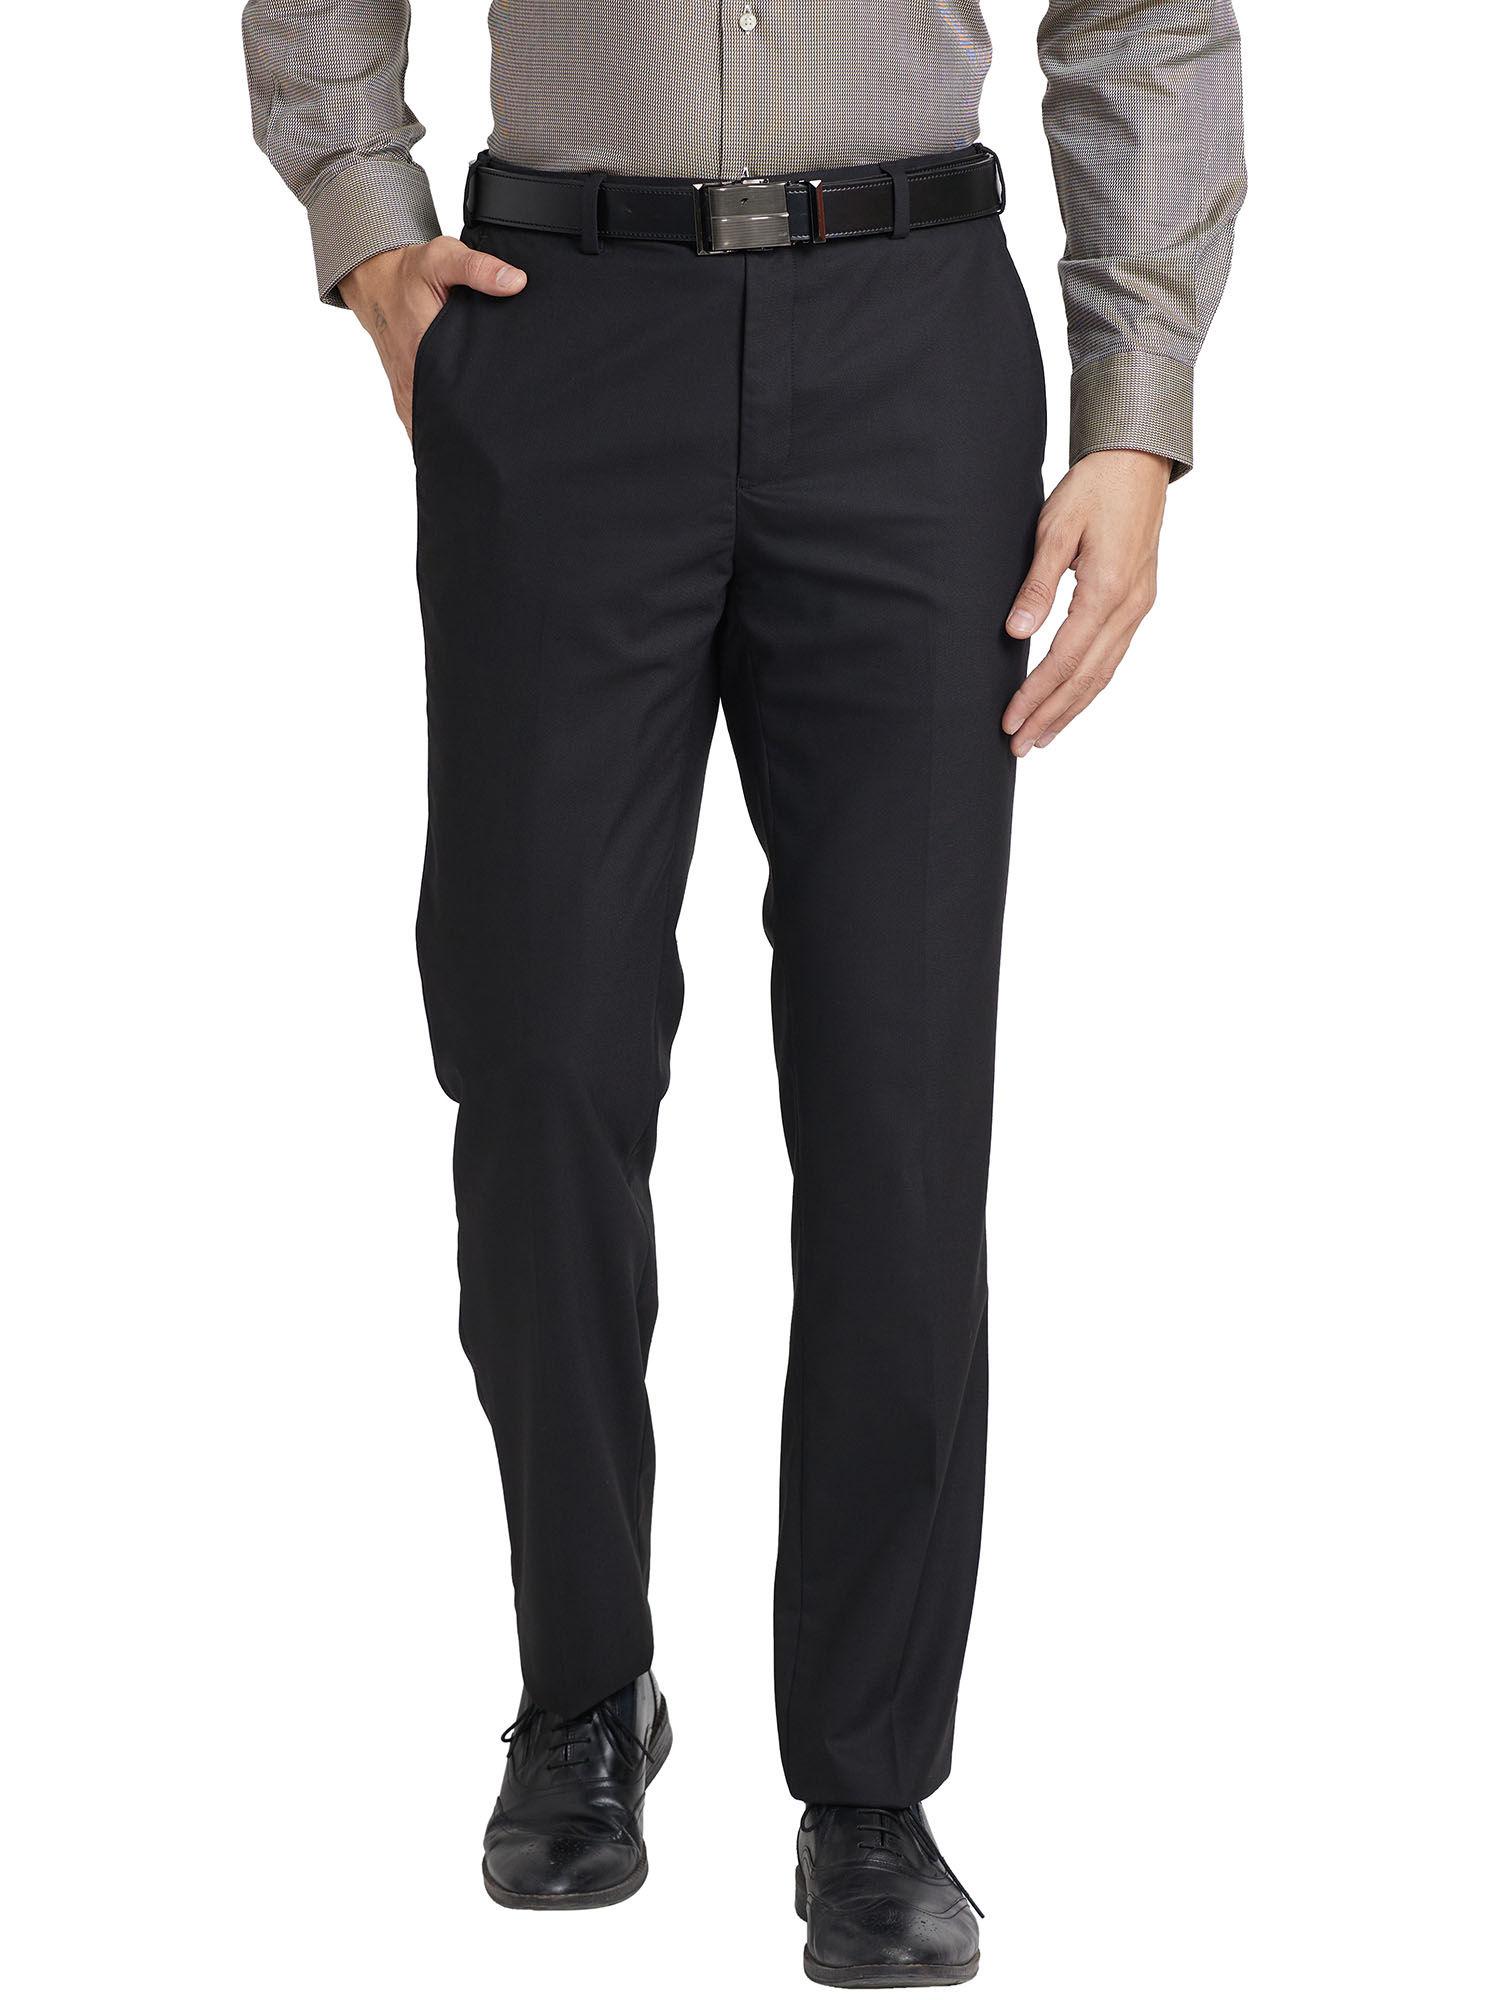 comfortable fit solid black trouser